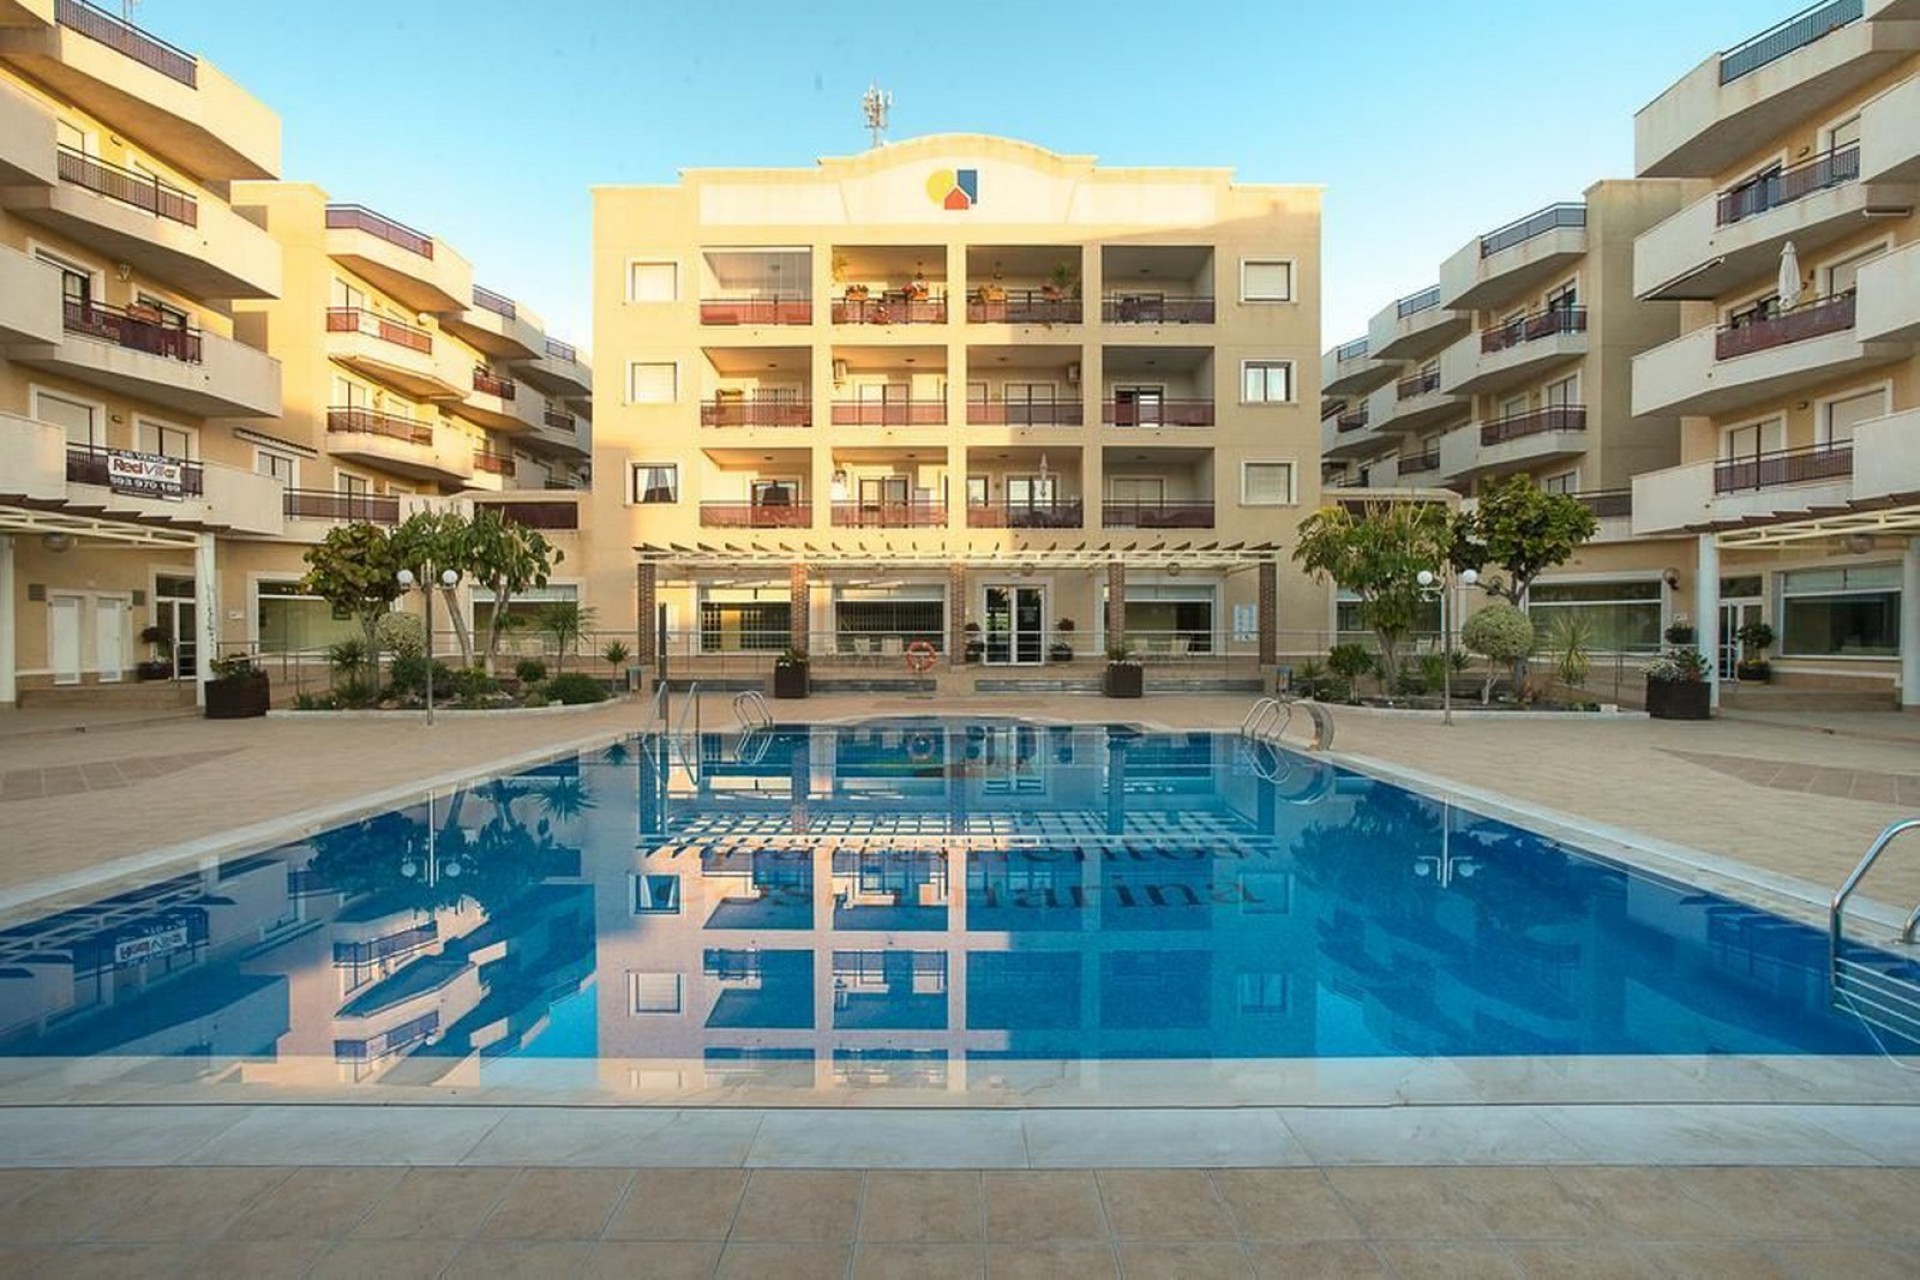 For sale: 3 bedroom apartment / flat in Cabo Roig